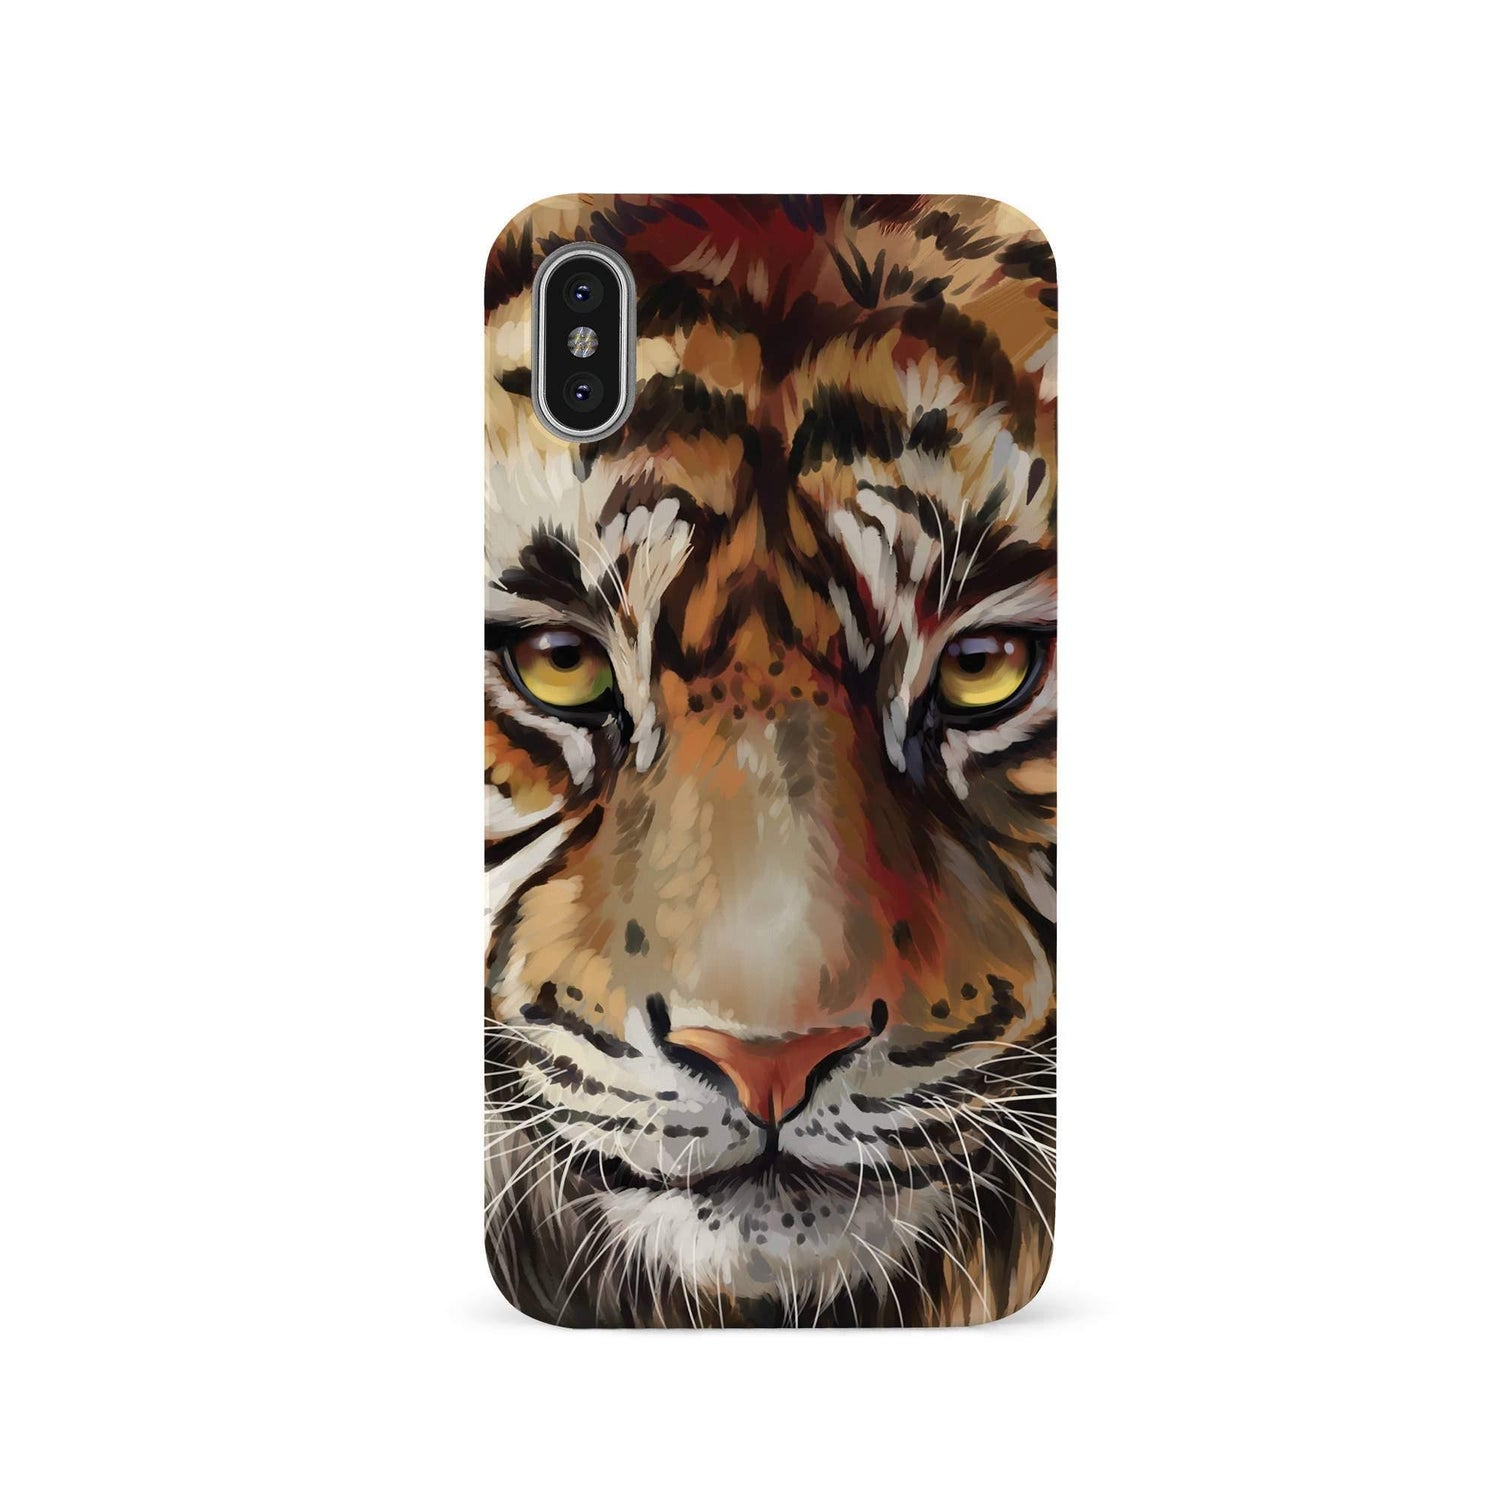 Tiger Face UV Colored Wood - Case Yard USA